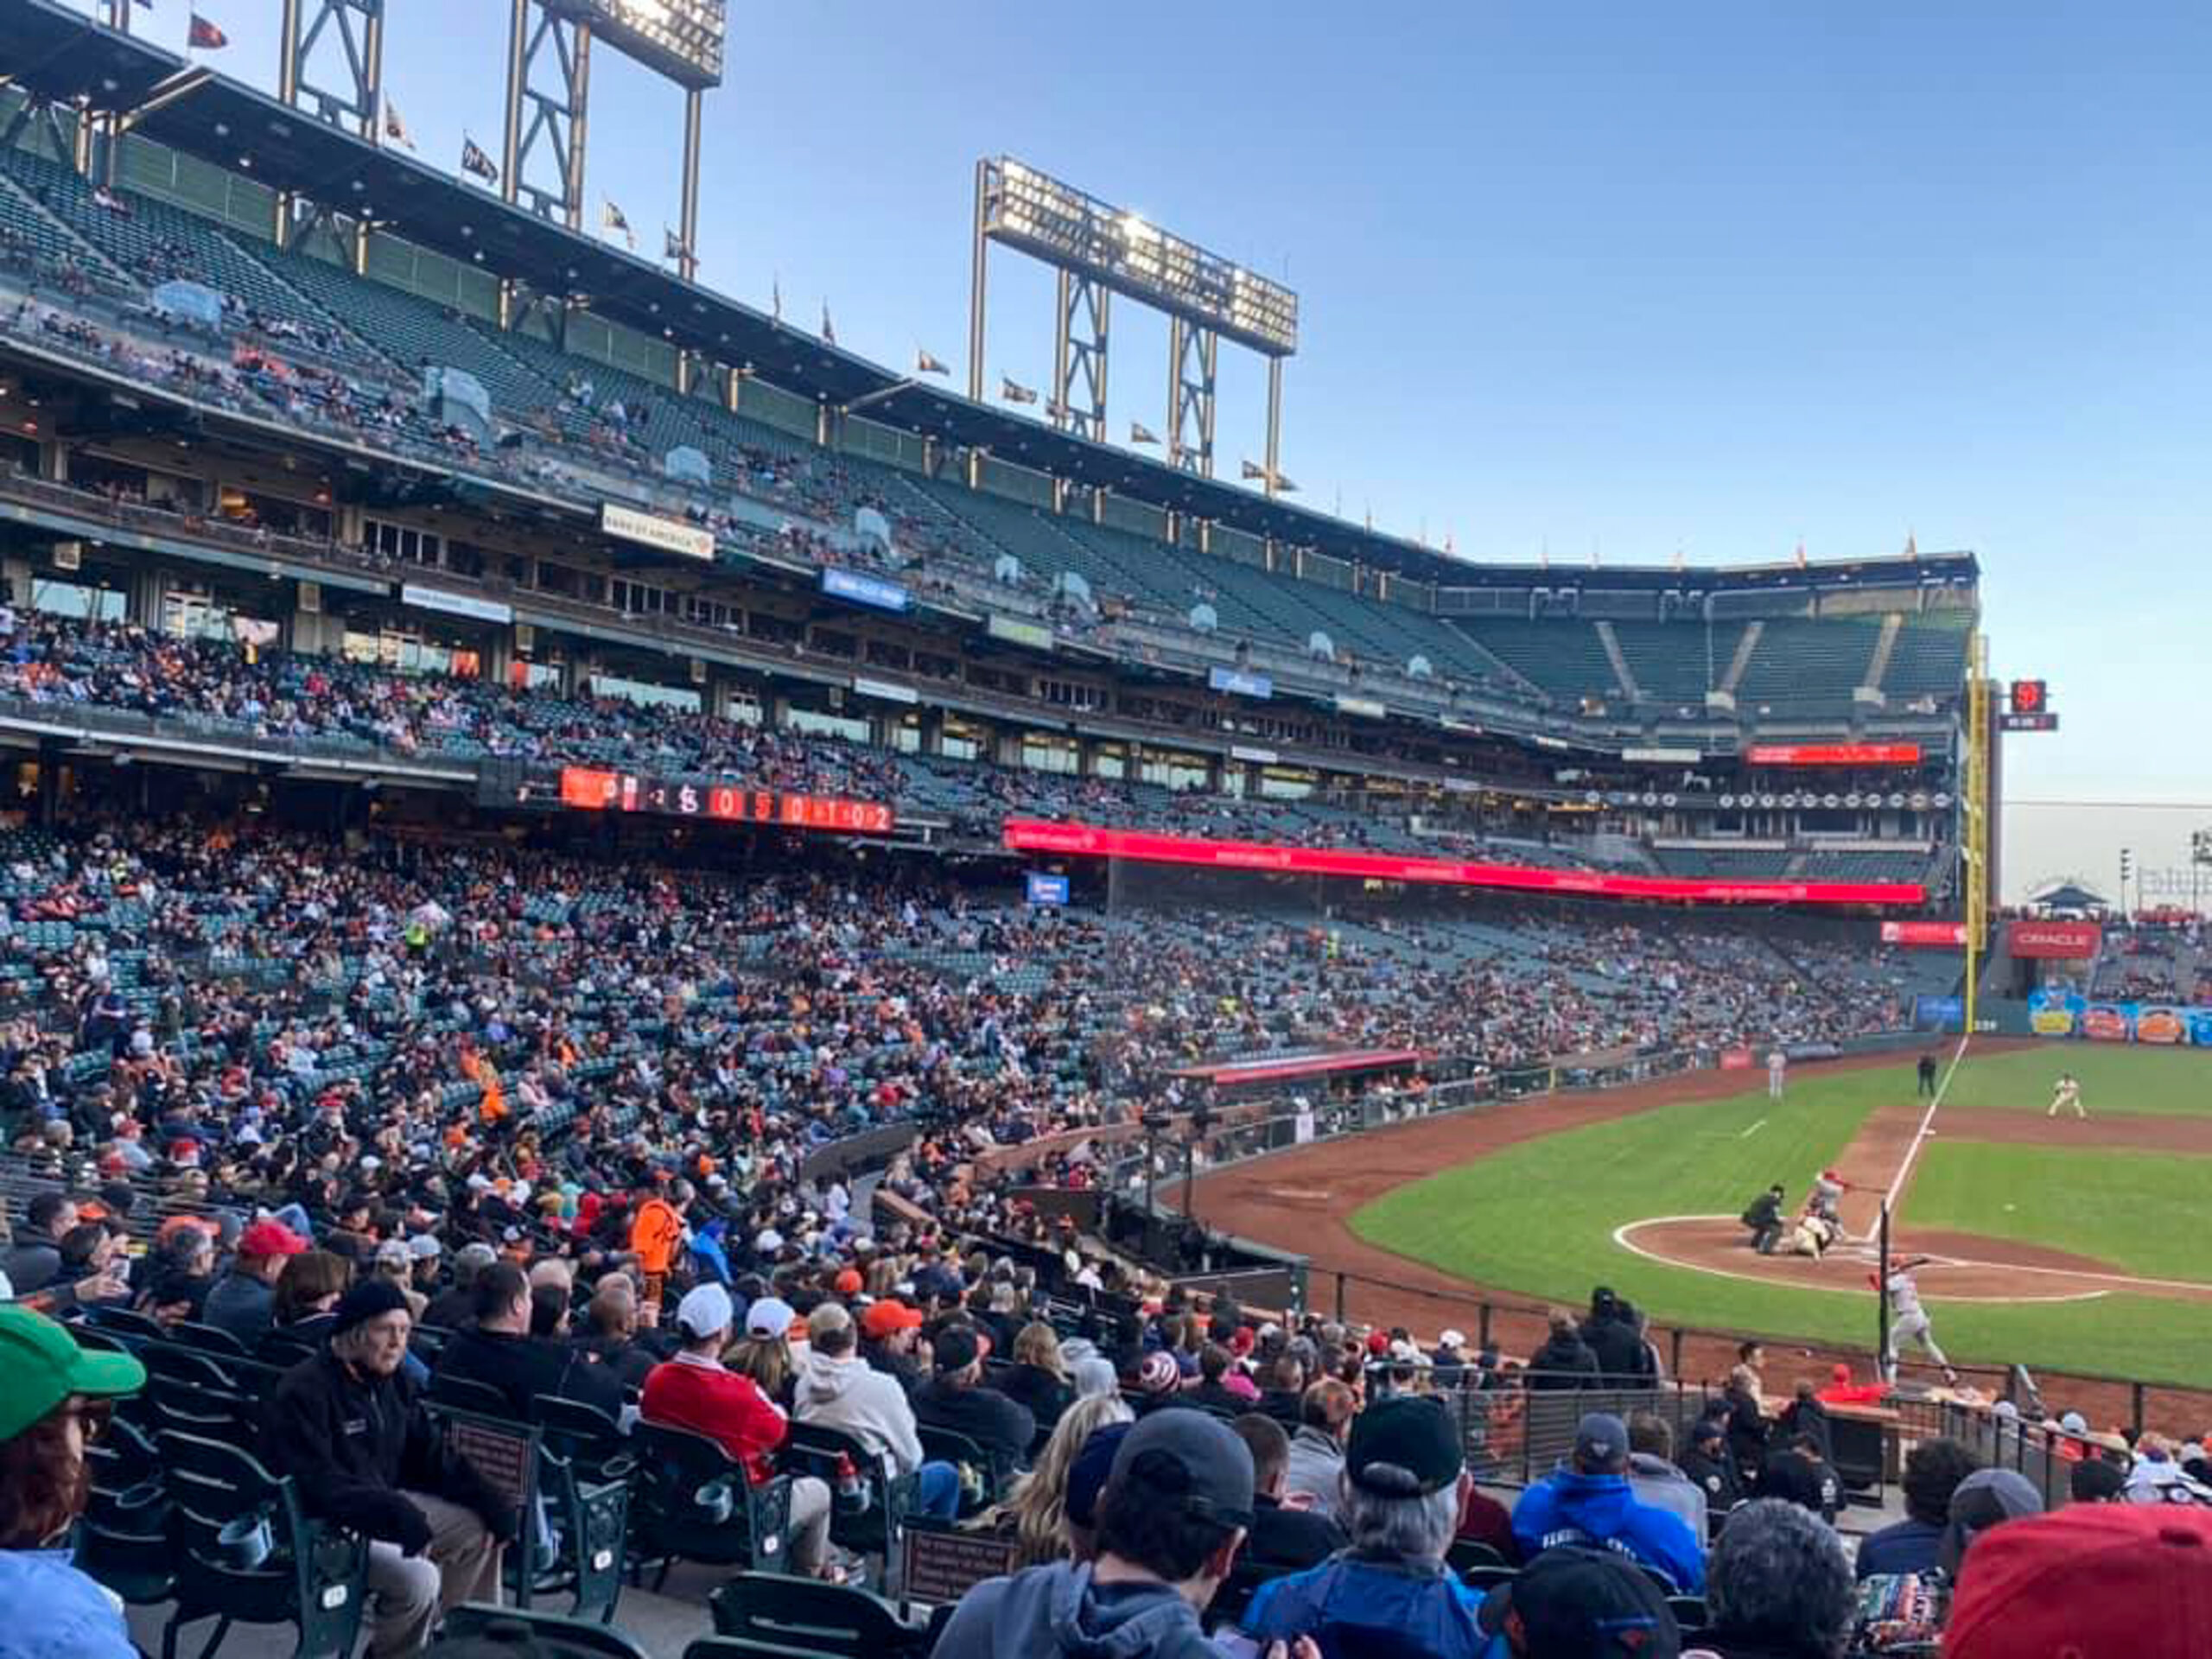 San Francisoc Giant's fans sitting at Oracle Park.